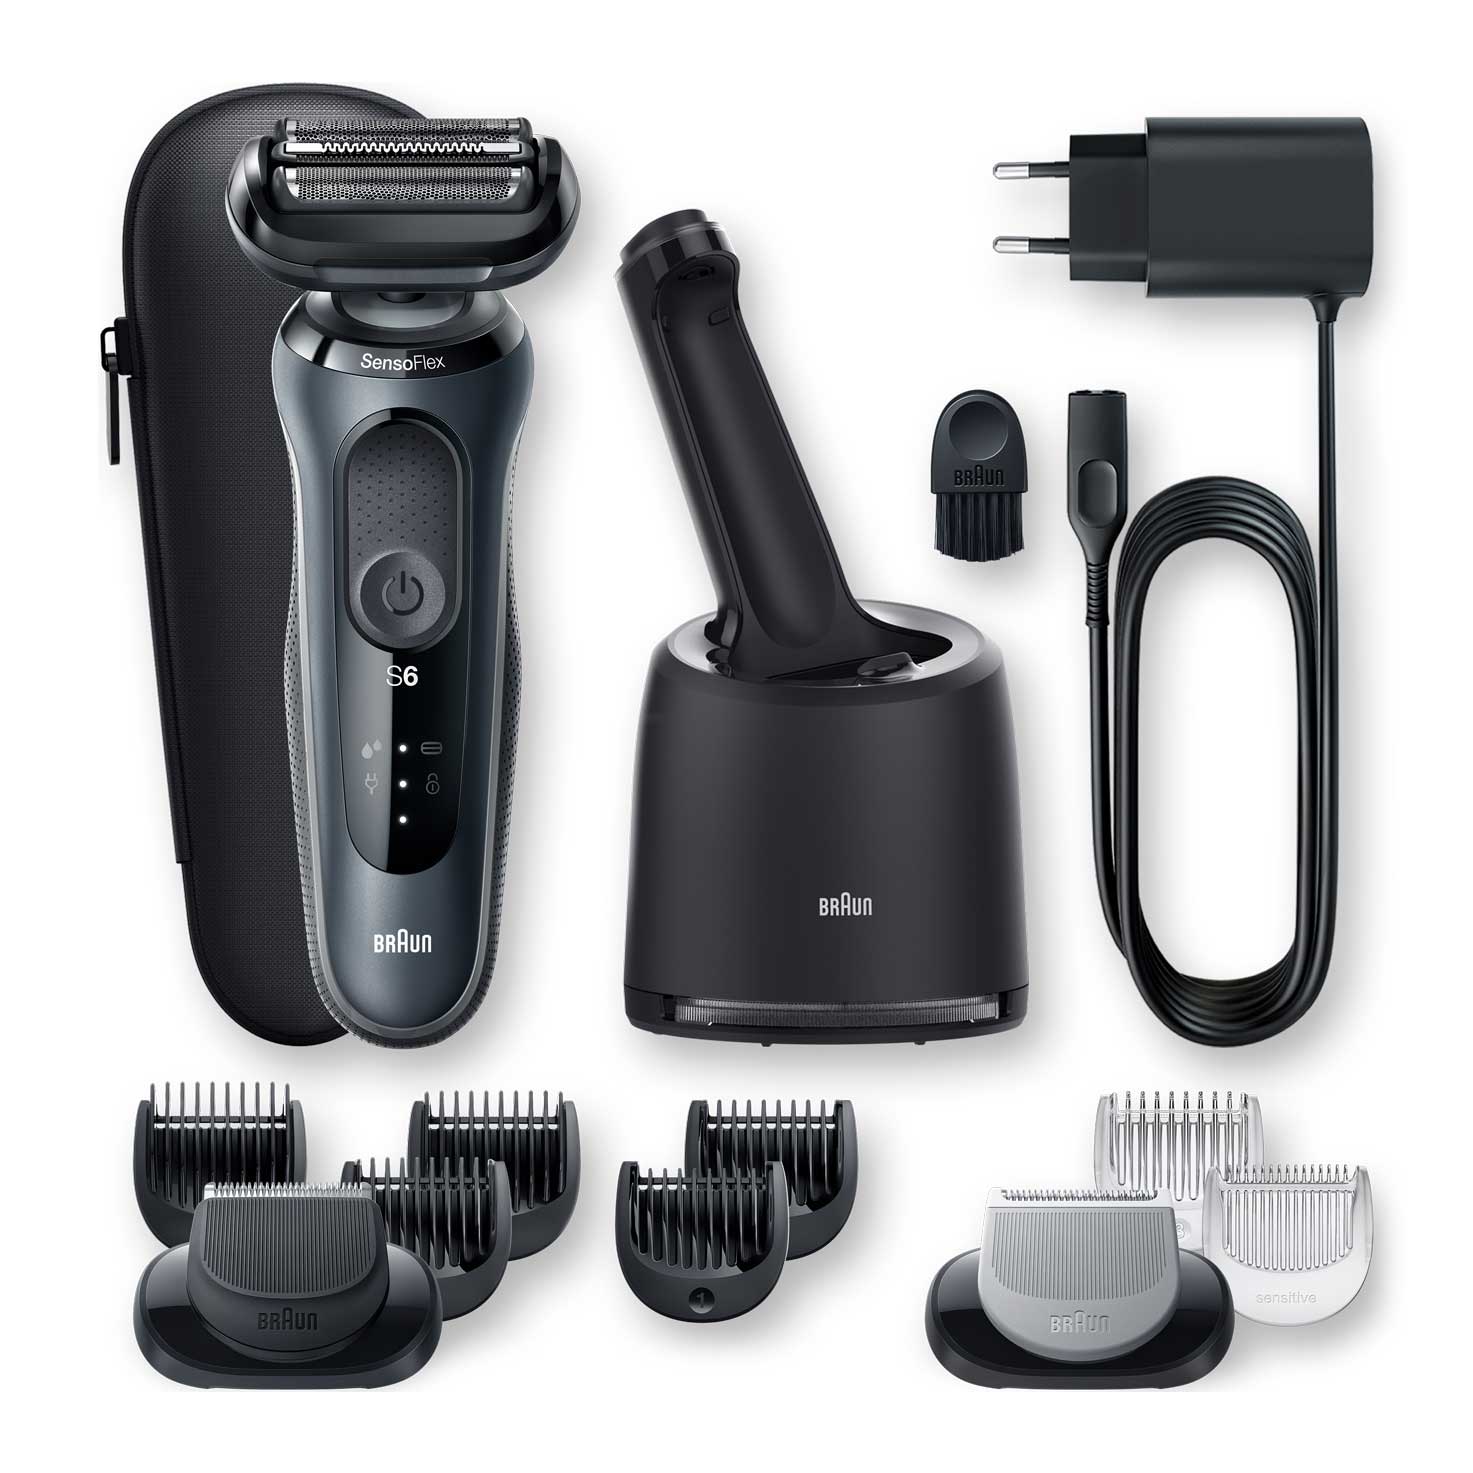 Braun Electric Hair Clipper for men, Series 6, for dry & wet use, Gray, 60-N7650cc